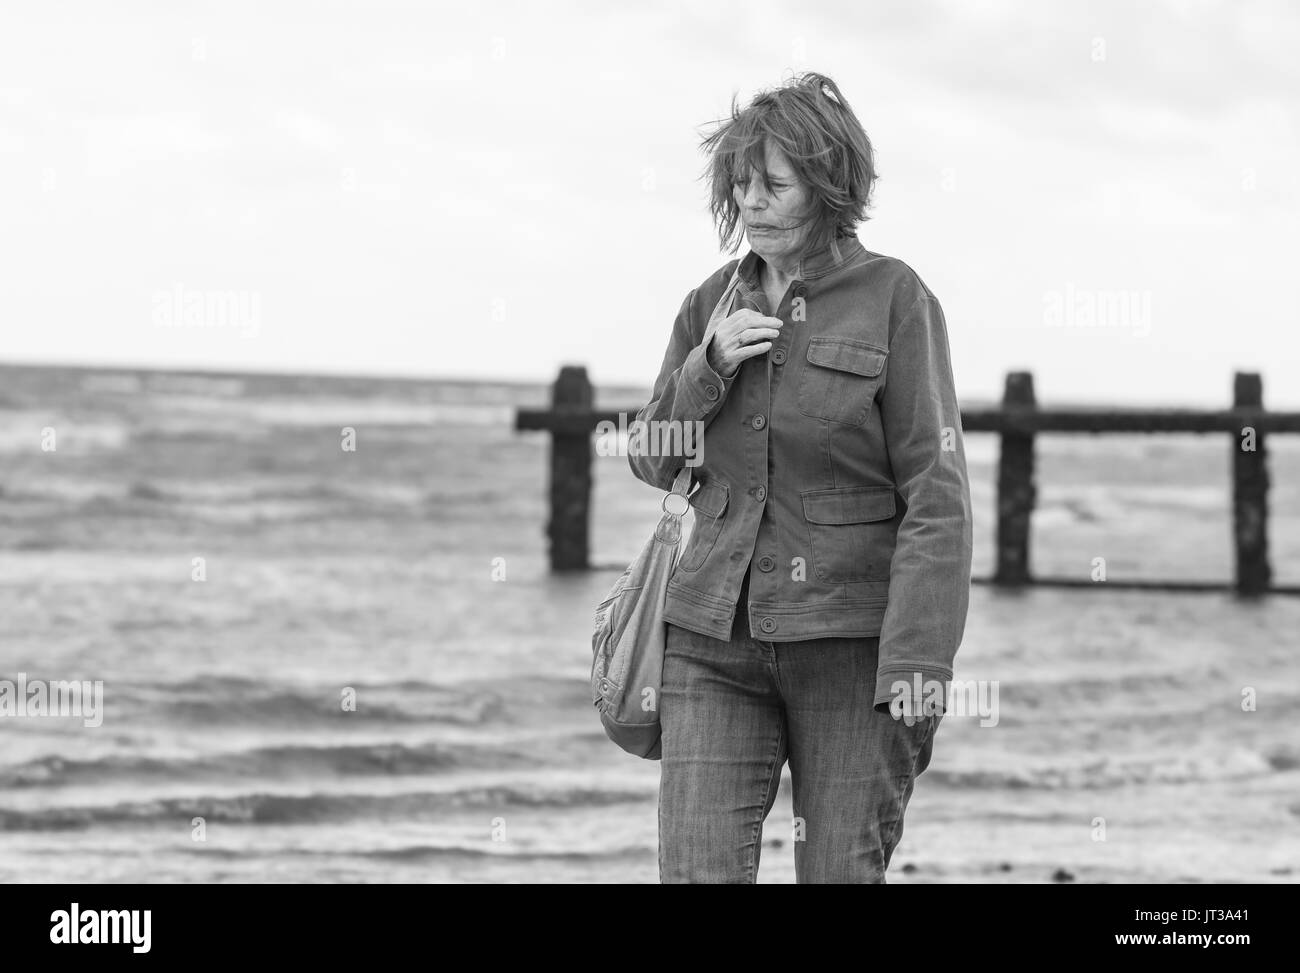 Elderly / Middle aged woman walking by the sea on the coast on a windy day in the UK. Black & White image. Stock Photo